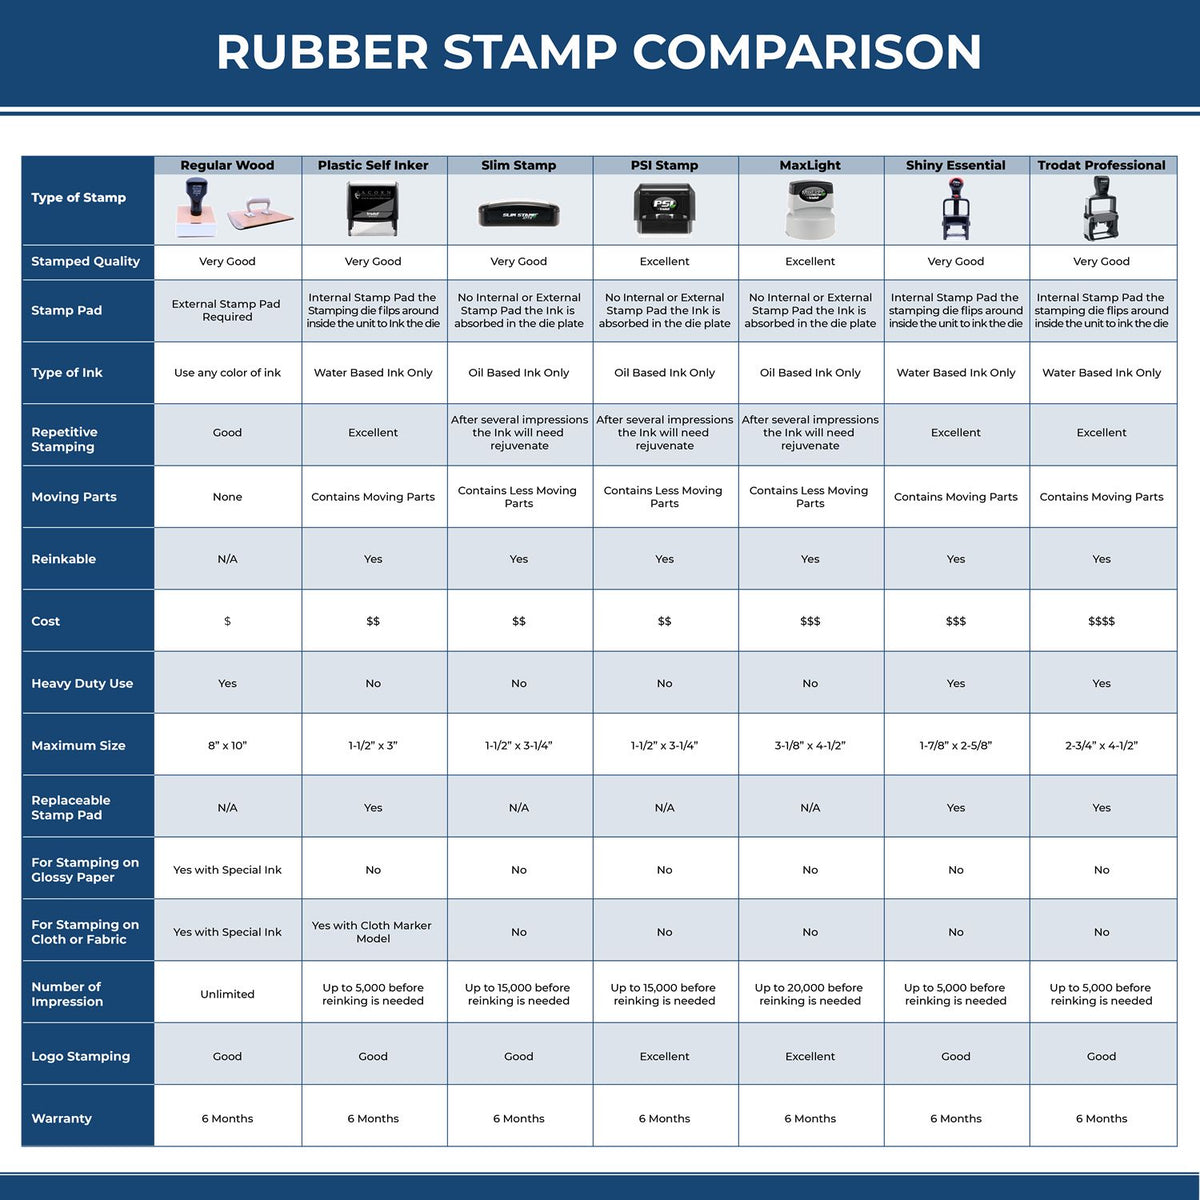 A comparison chart for the different types of mount models available for the Heavy-Duty Wyoming Rectangular Notary Stamp.